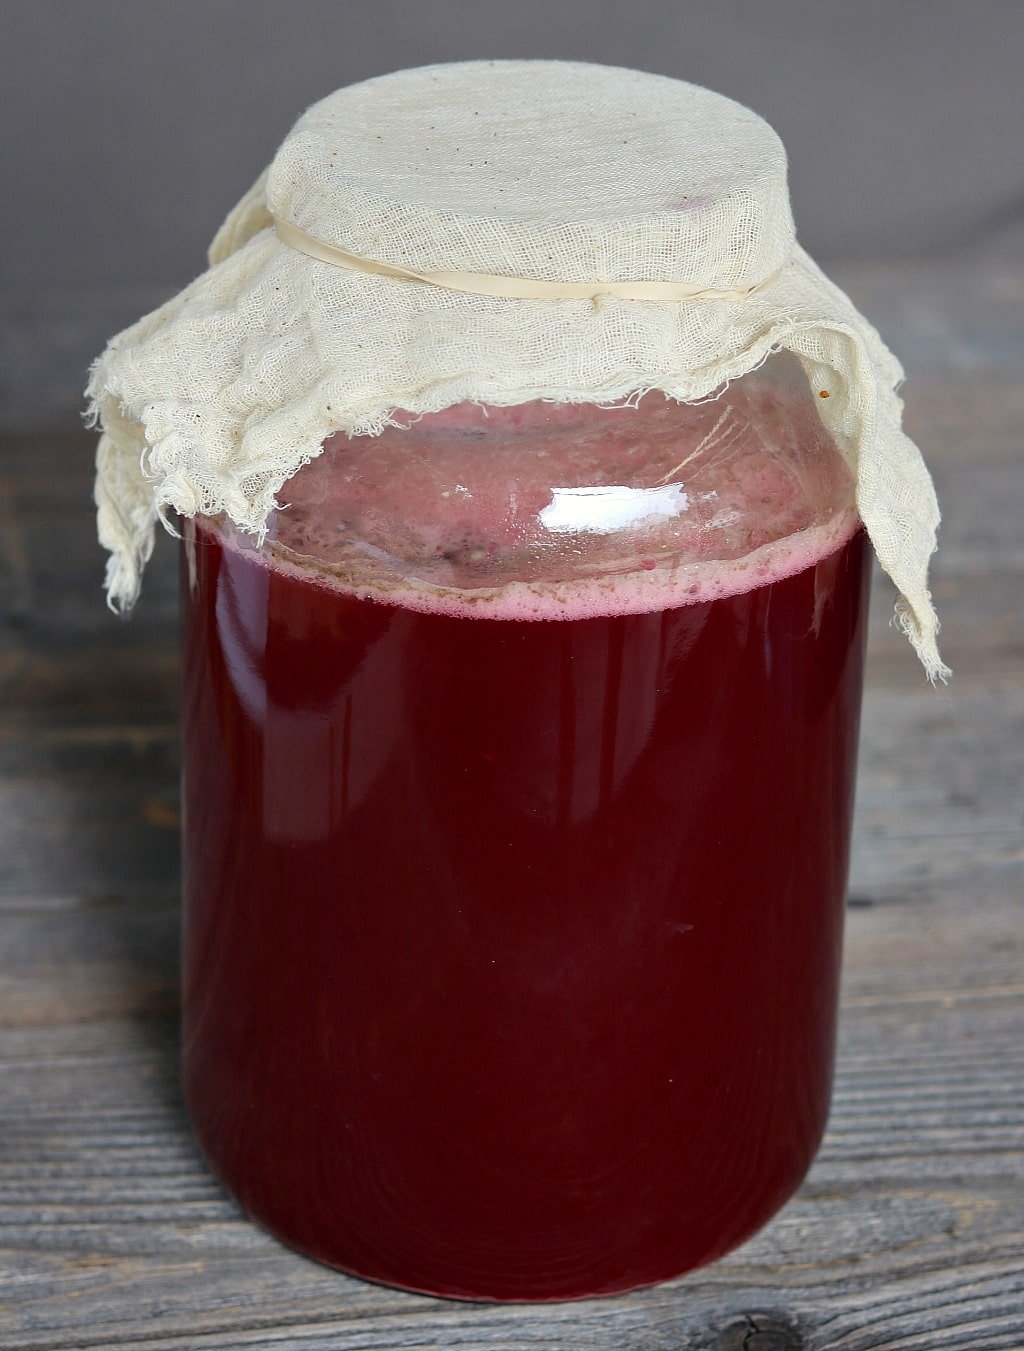 Elderberry soda fermenting in a large jar with cheesecloth on top, sitting on a gray wood surface.